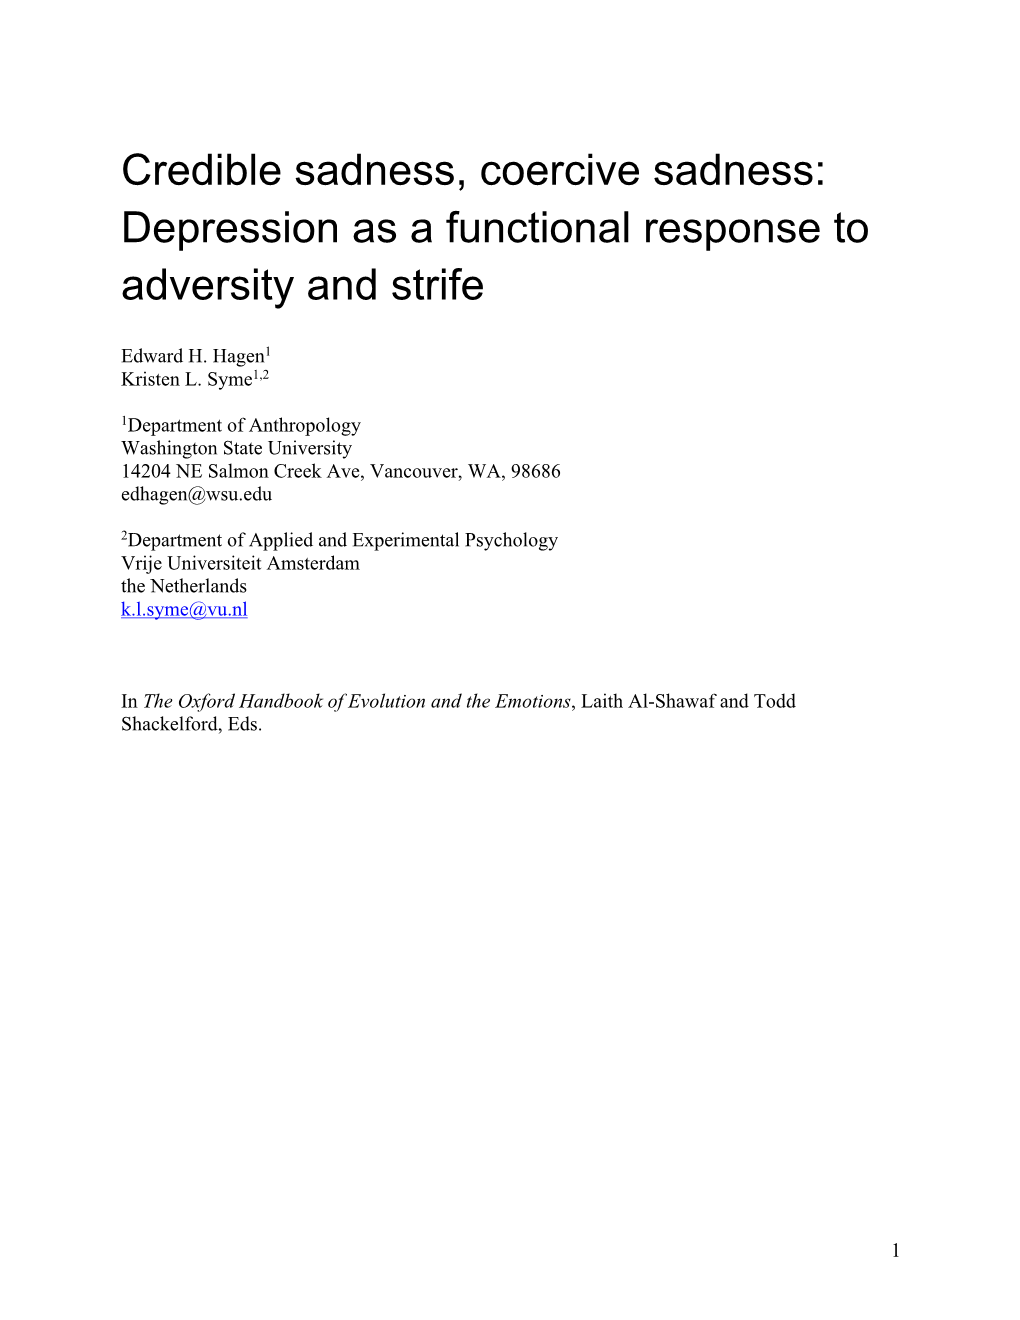 Depression As a Functional Response to Adversity and Strife